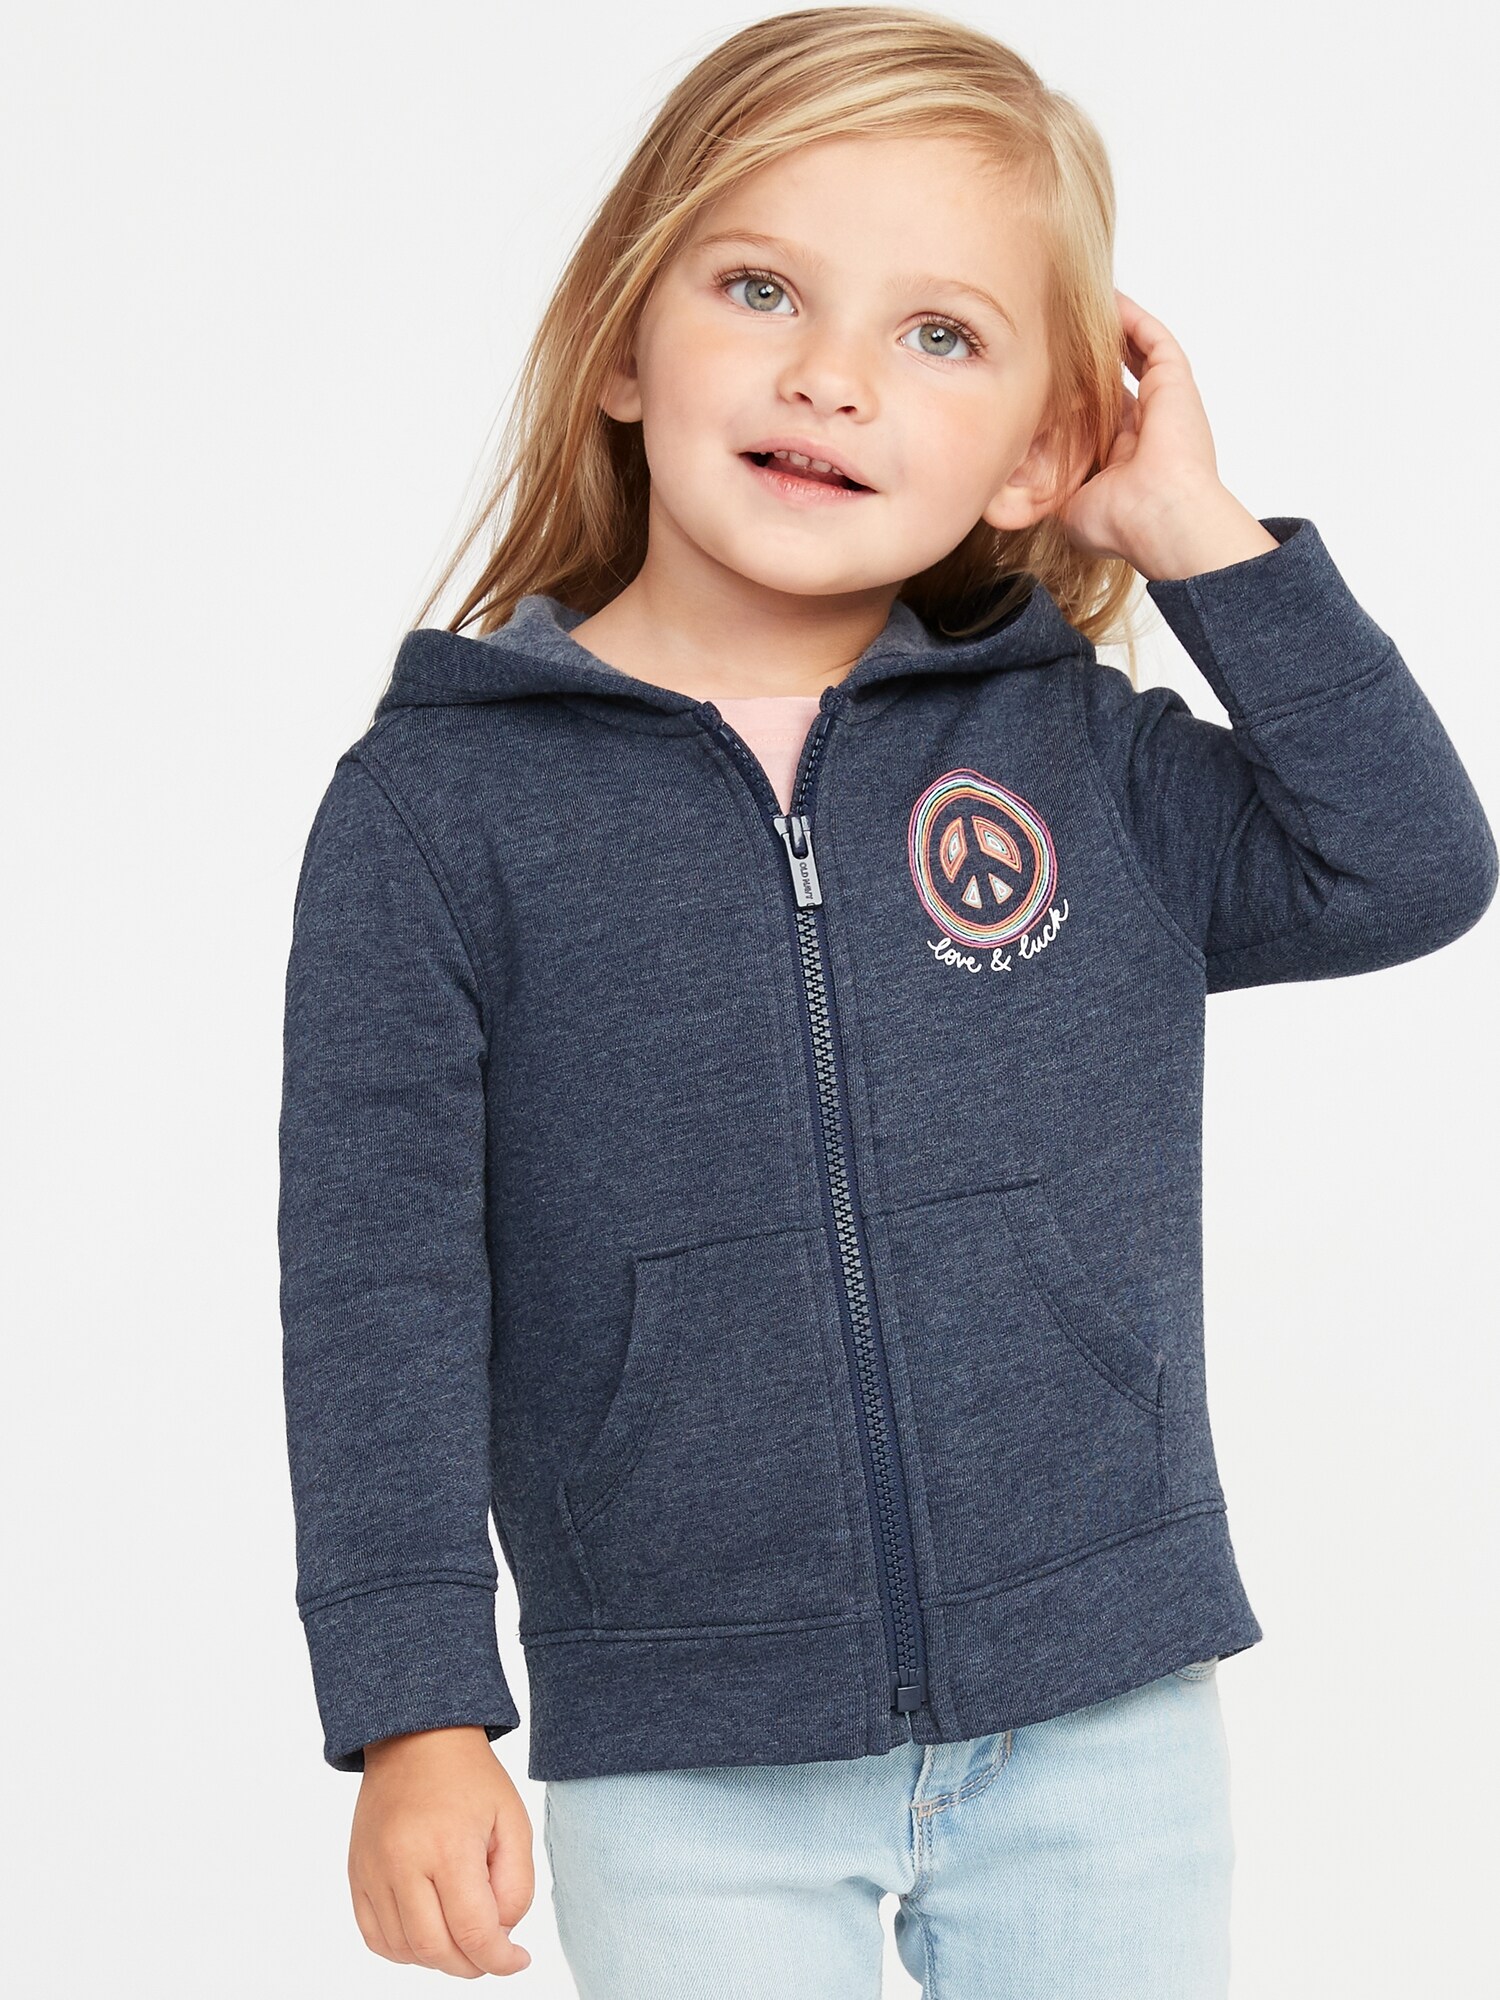 Graphic Zip Hoodie for Toddler Girls | Old Navy